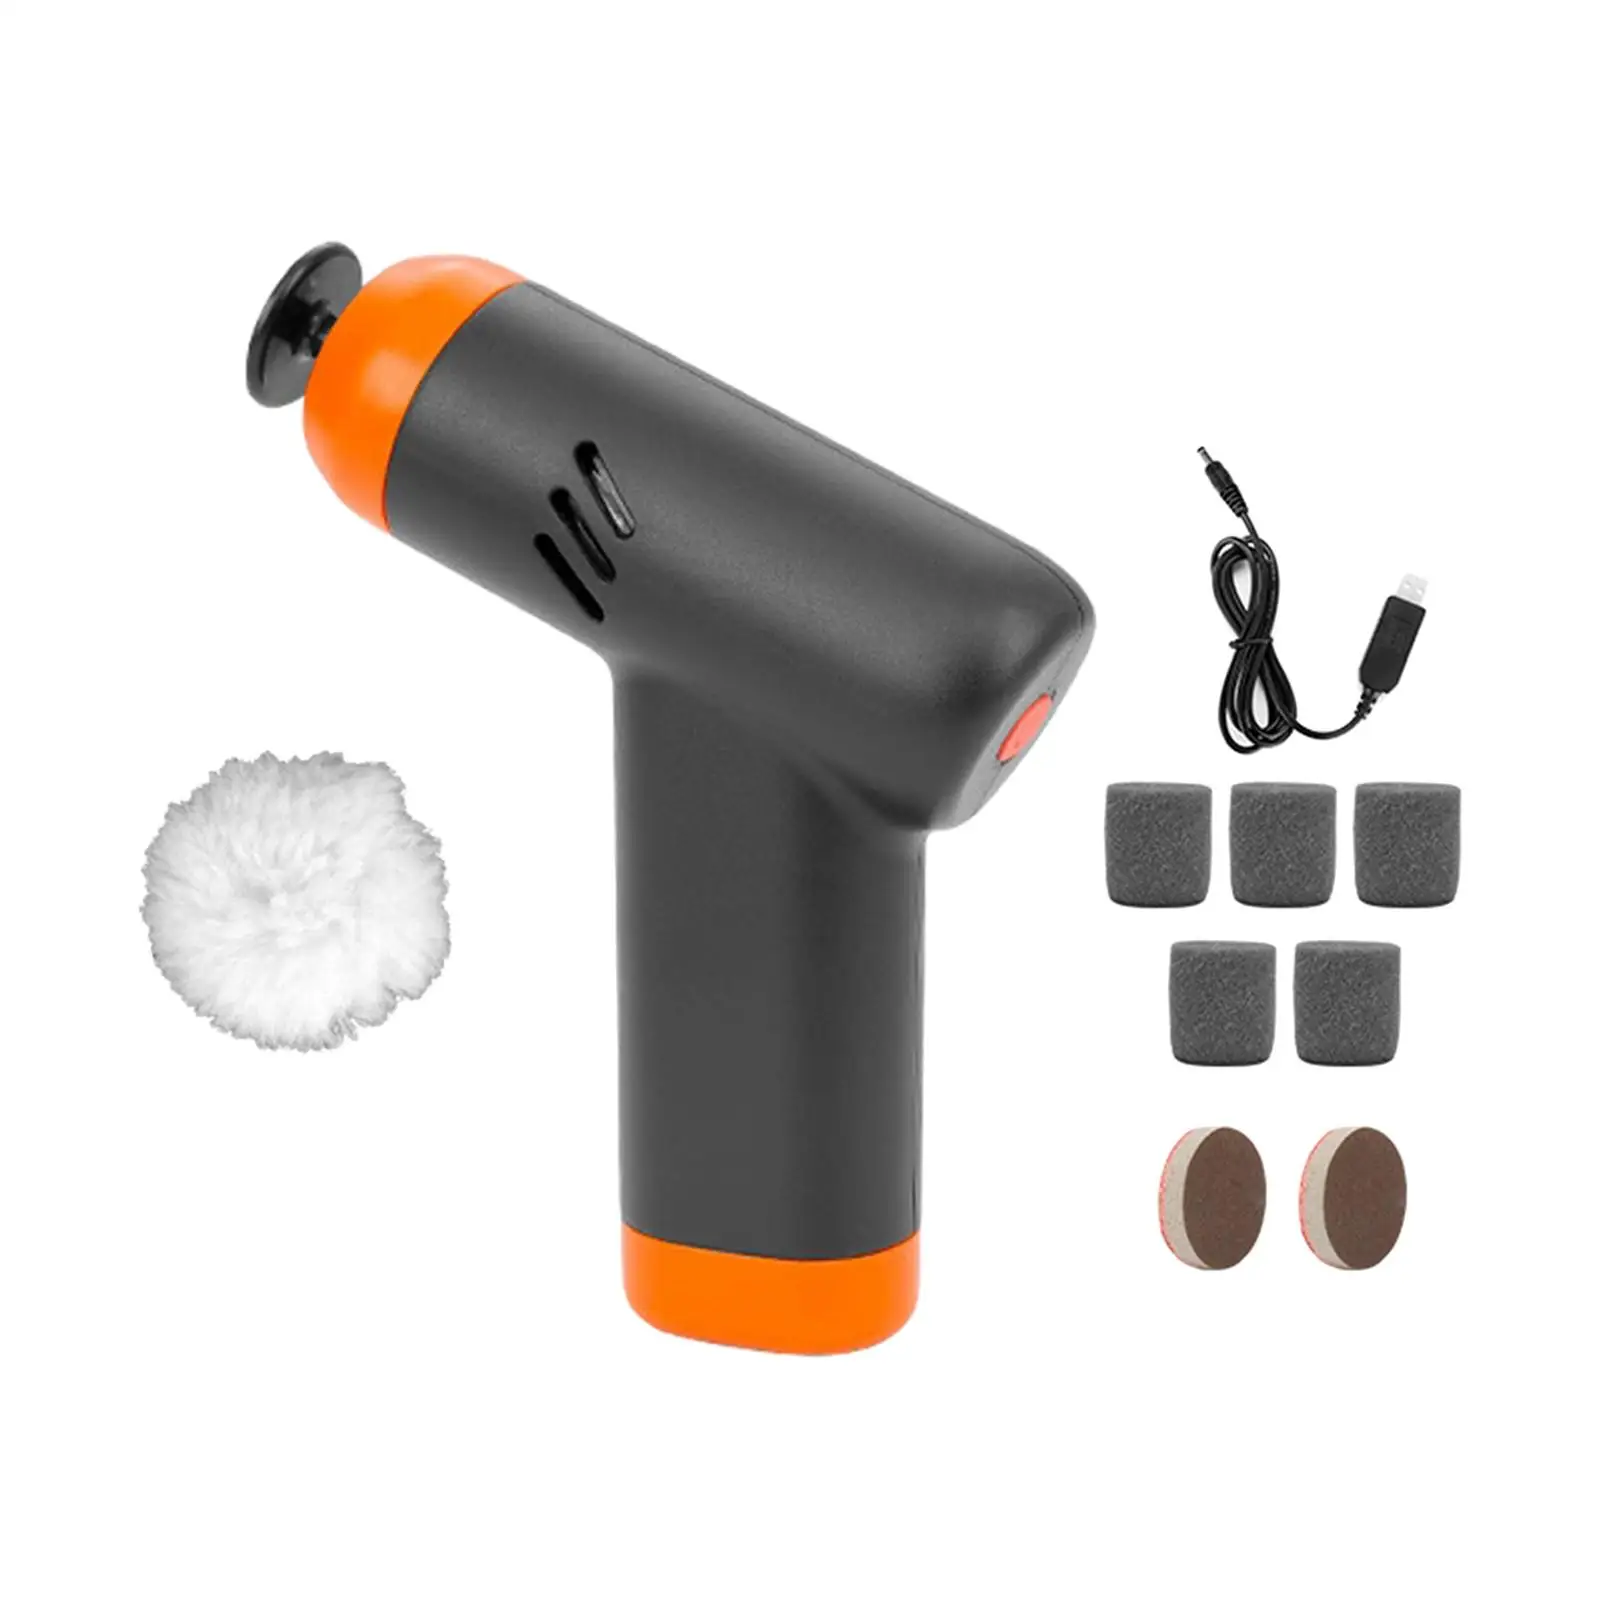 Car Polisher Waxer for Washing Cleaning Waxing Dusting Car Small Power Tool Car Body Polishing Machine Convenient Small